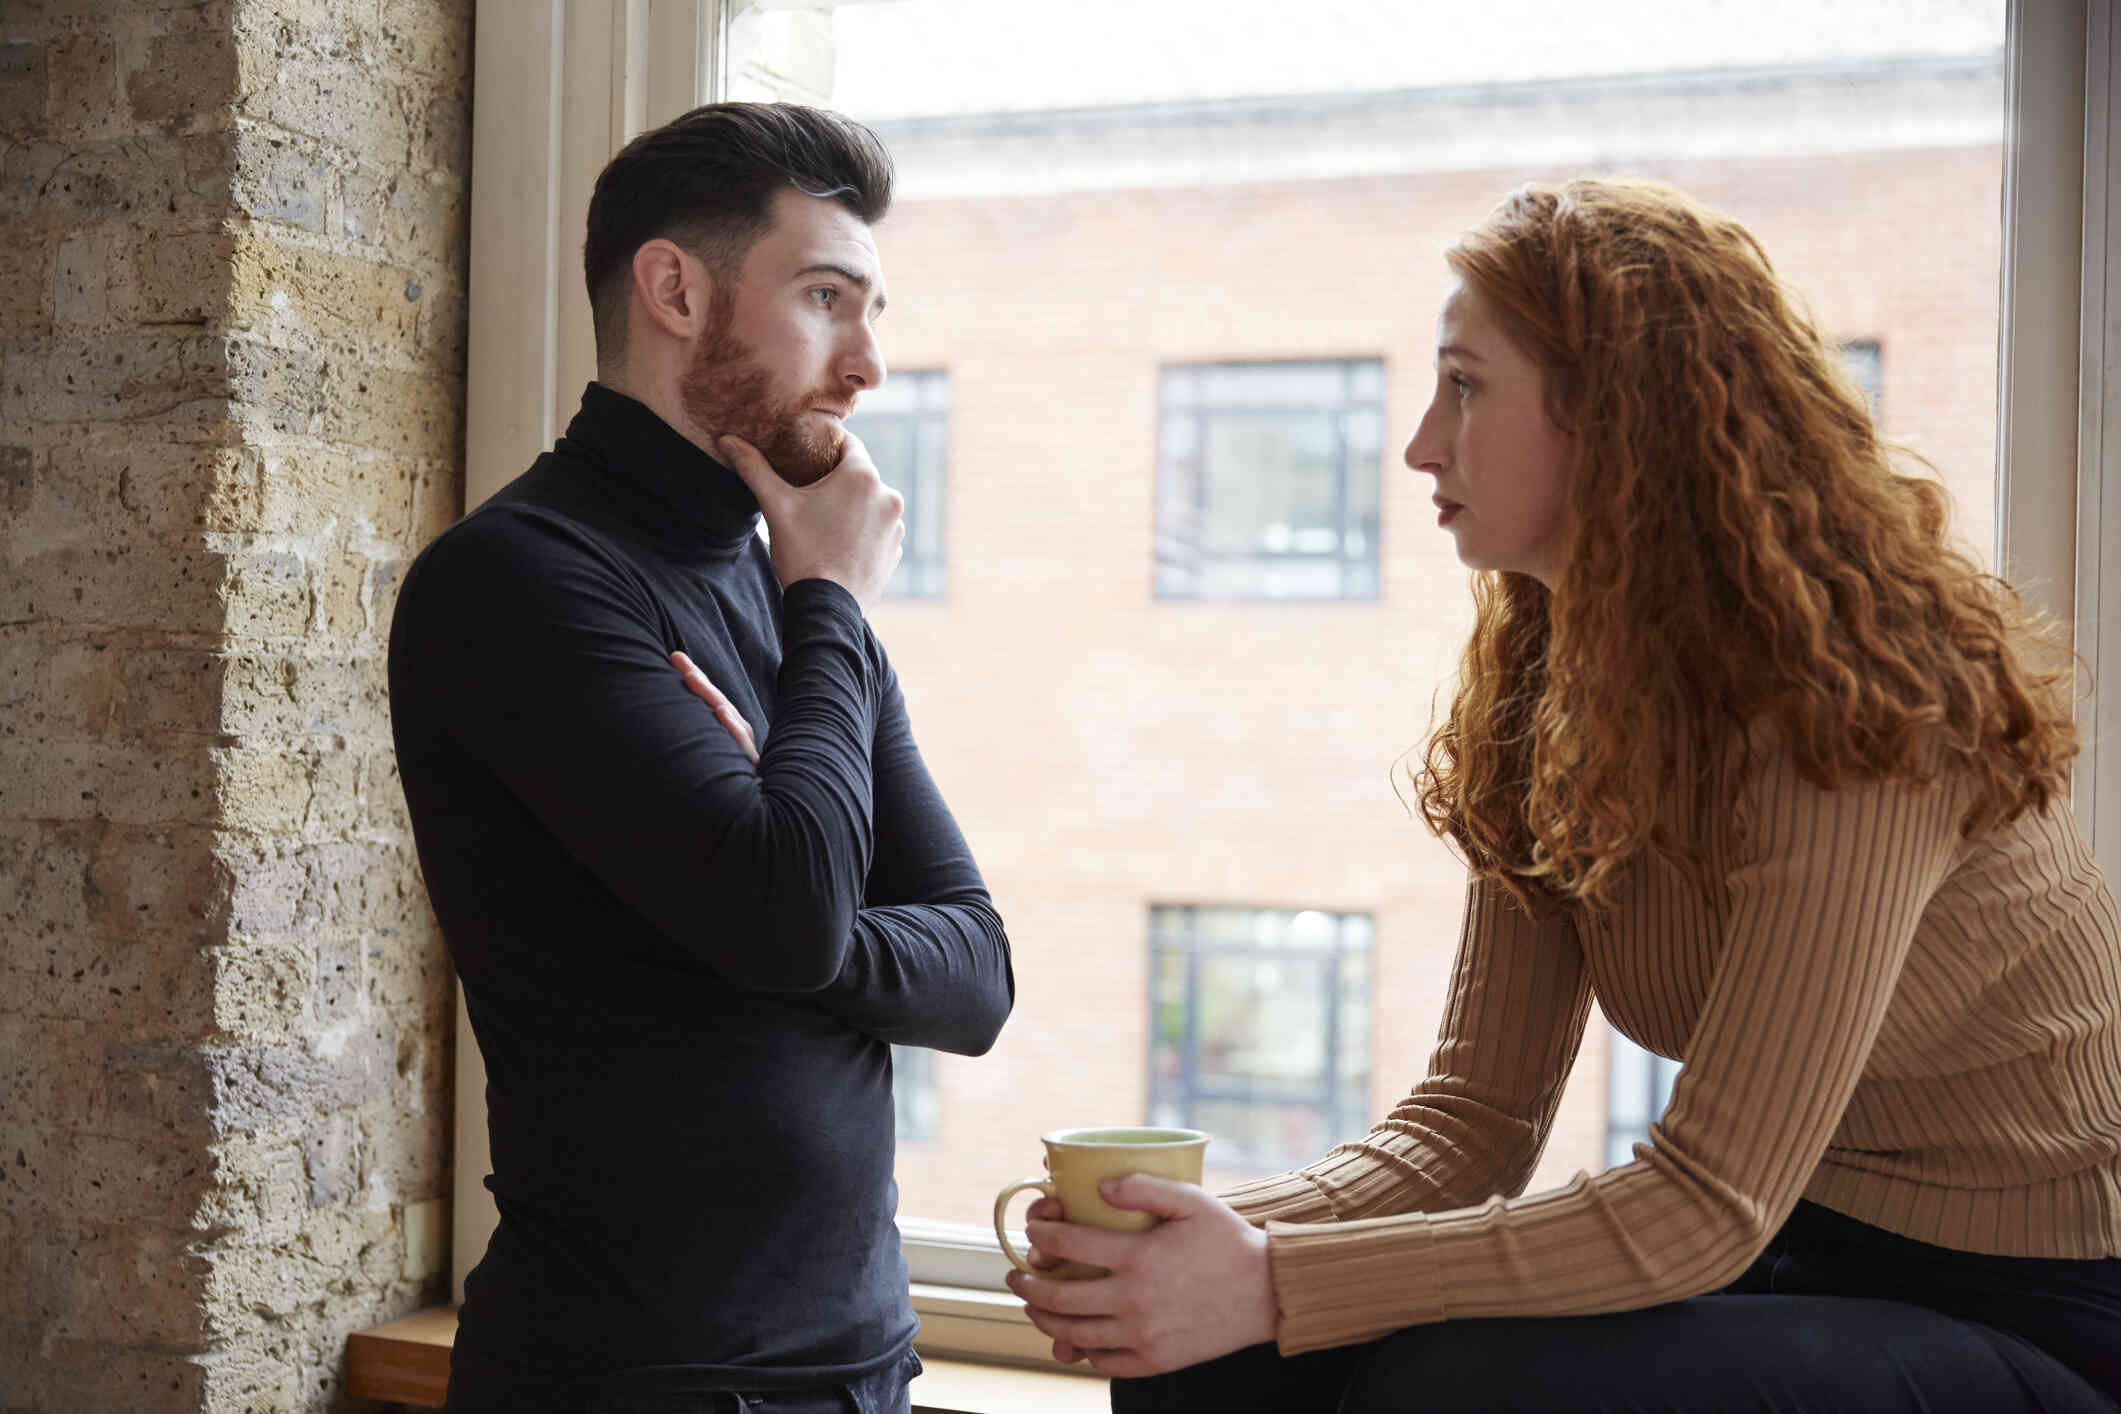 A man in a black turtleneck looks upset as he gazes out of a window with his hand to his face as a woman sits next to him and looks at him with a sad expression.